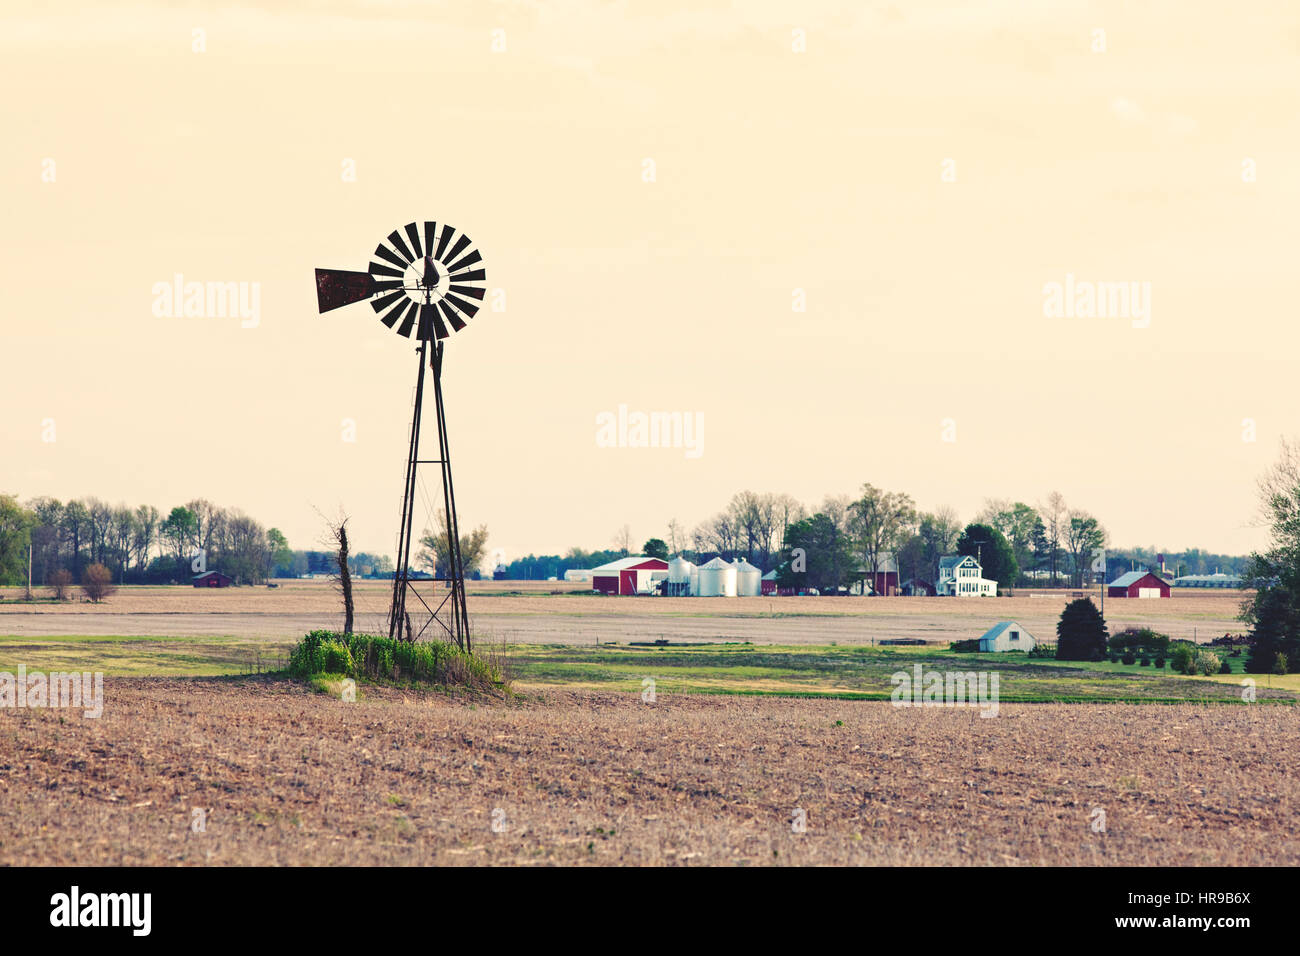 Windpump in an agricultural field. Rural midwest farm. Stock Photo